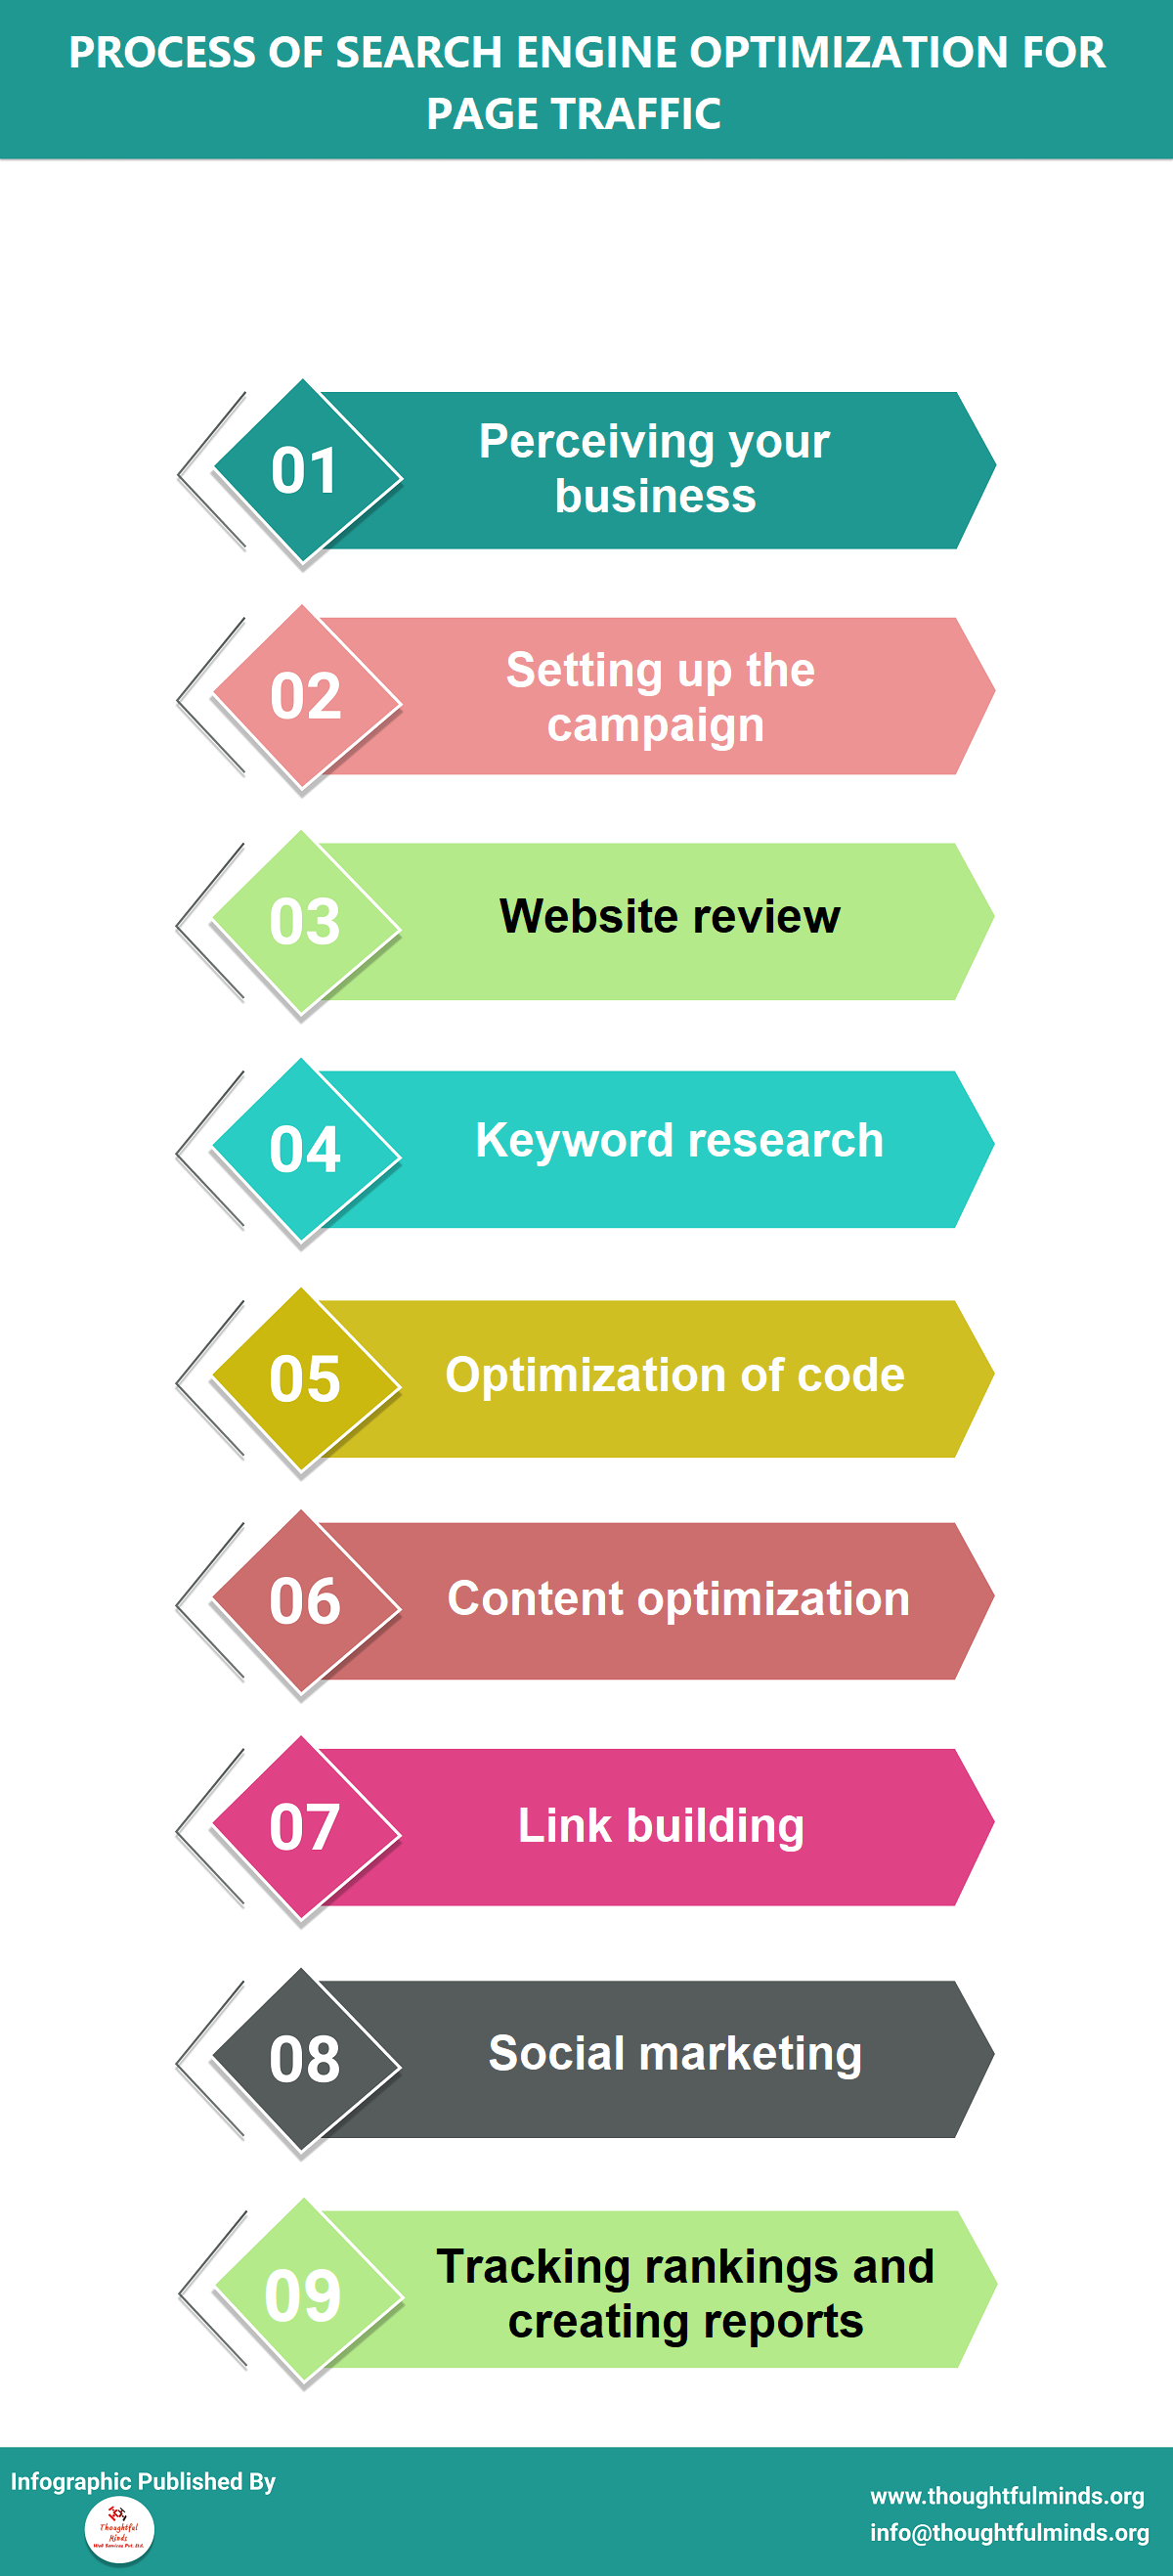 Infographic On SEO Process For Page Traffic - ThoughtfulMinds